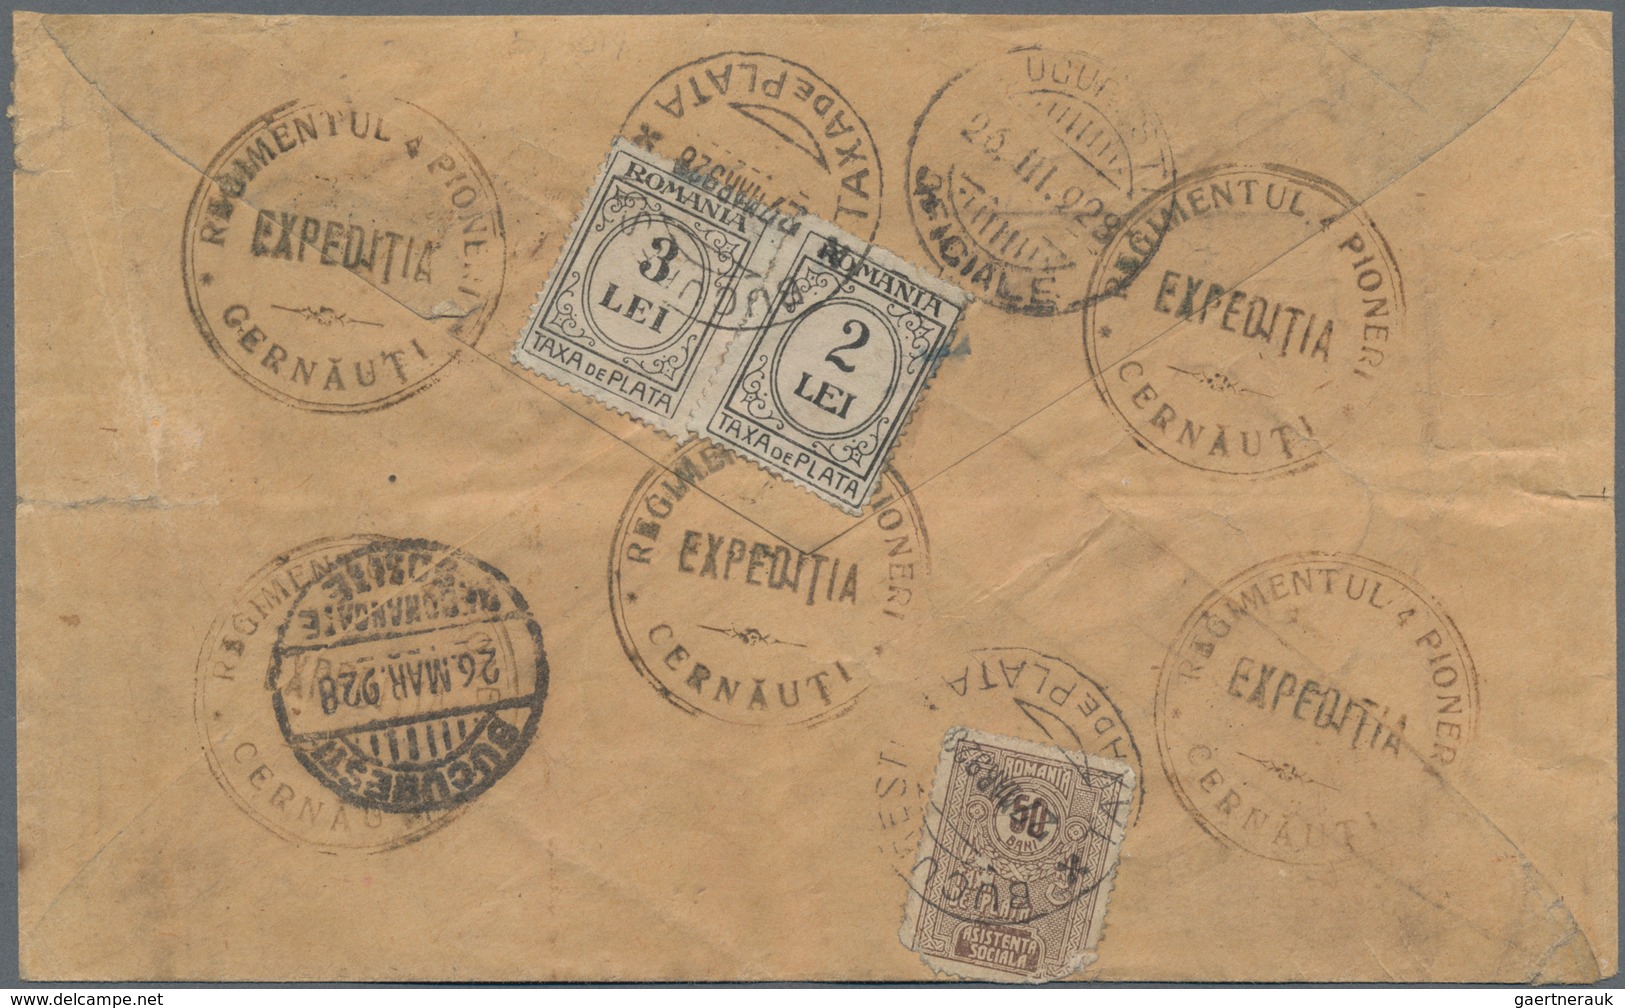 Rumänien - Portomarken: 1882/1940, assortment of apprx. 54 insufficiently paid covers/cards and bear